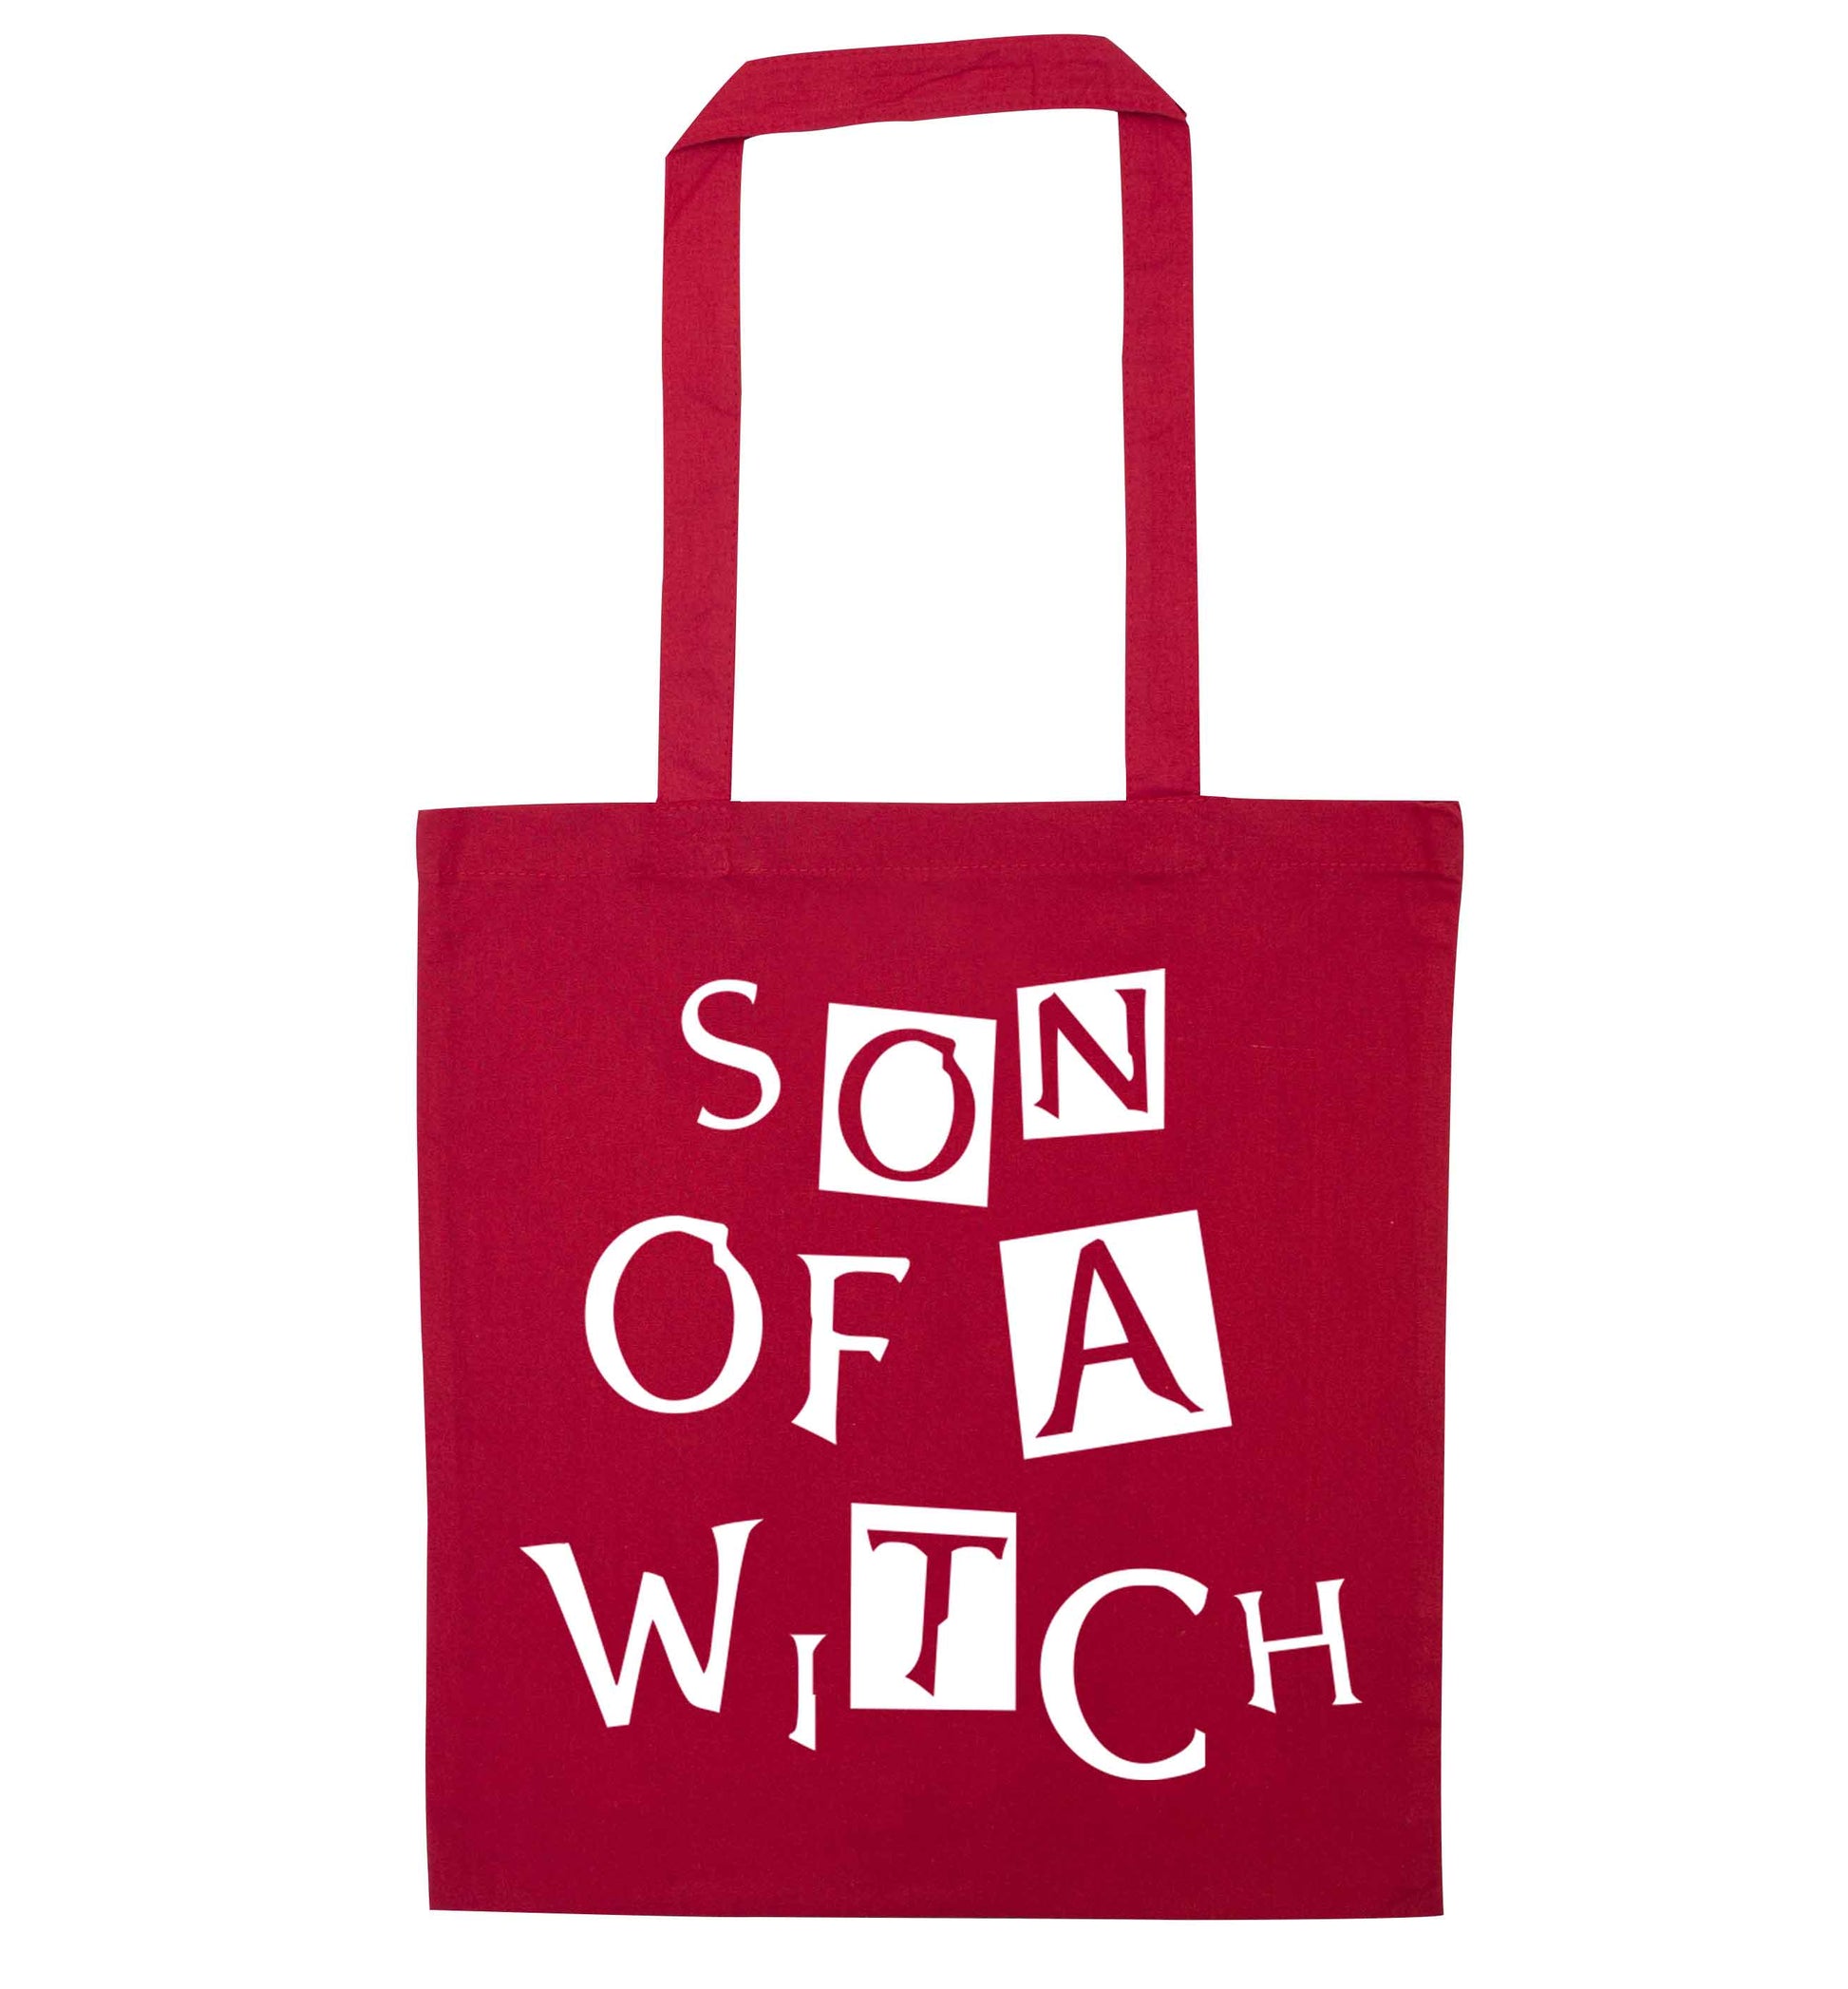 Son of a witch red tote bag